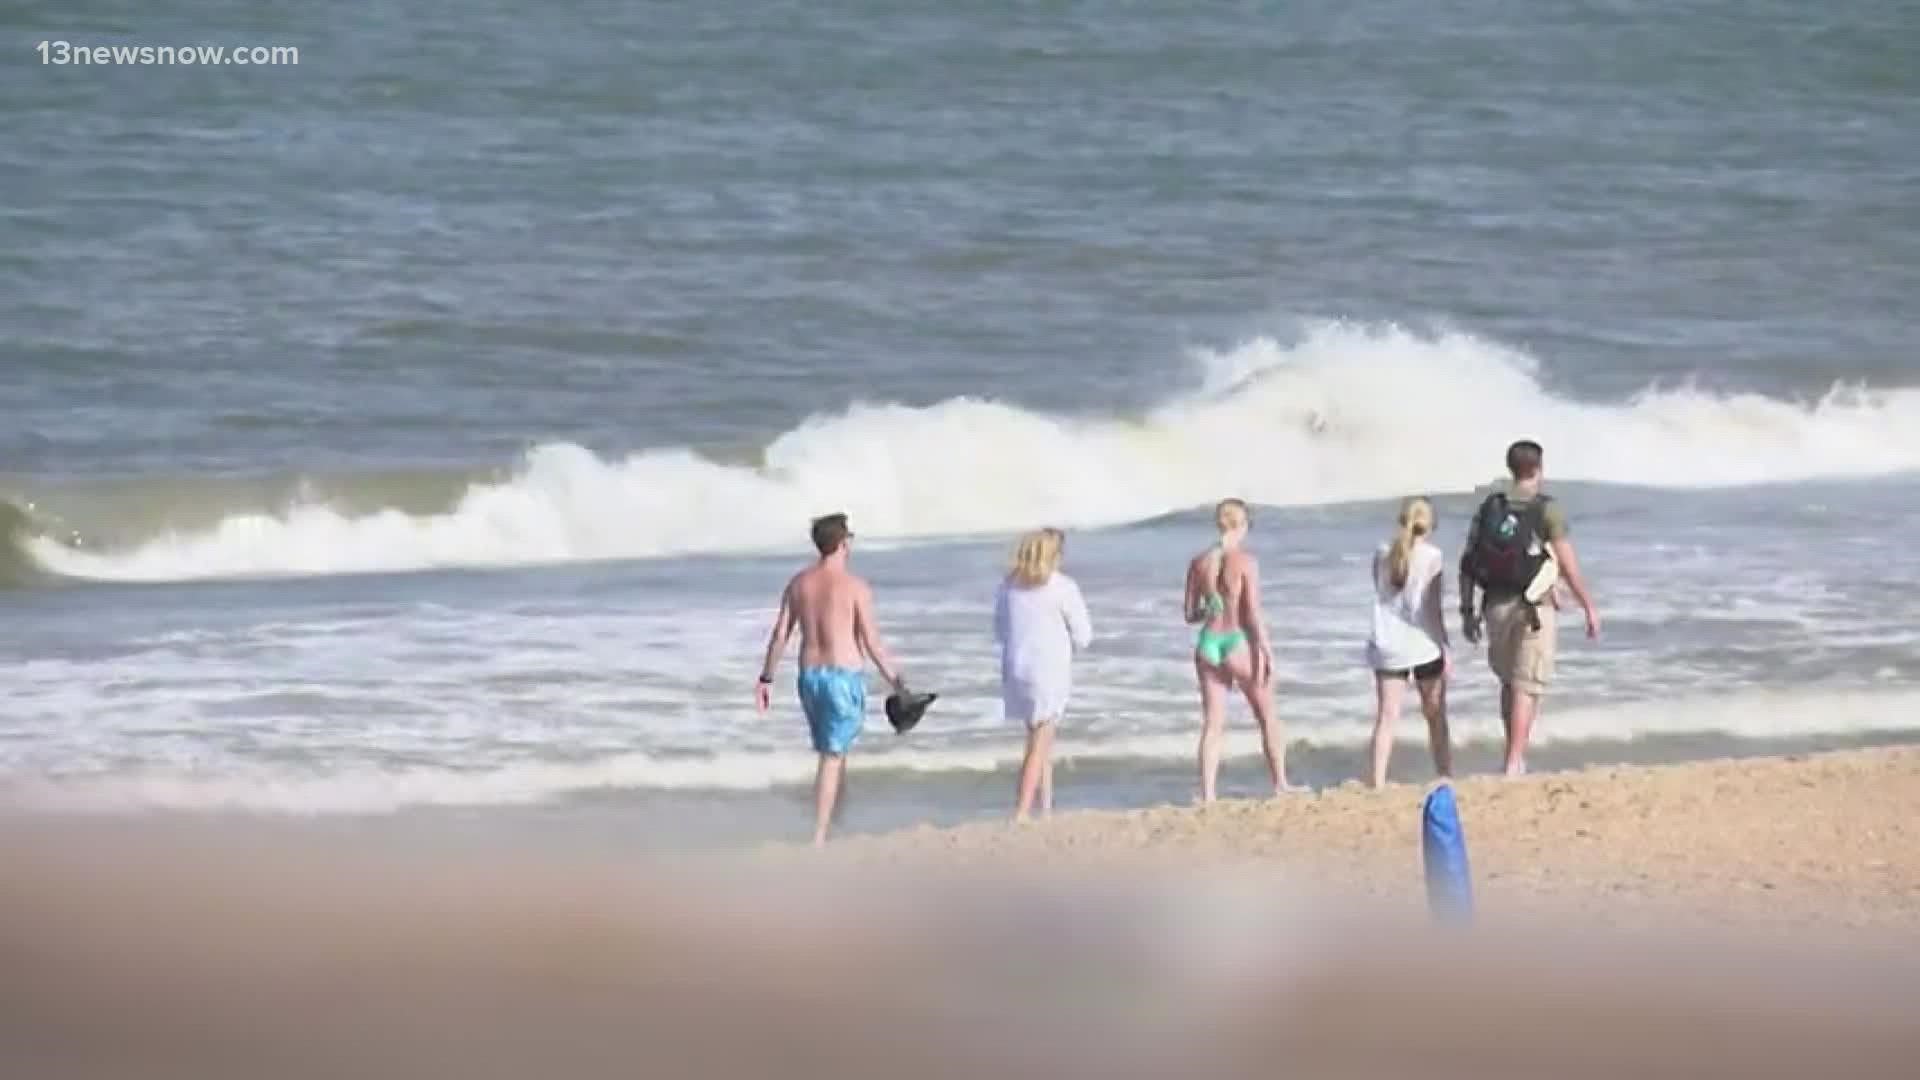 While the tropical storm warning was in effect Saturday, plenty of vacationers still enjoyed the beaches along the Outer Banks.